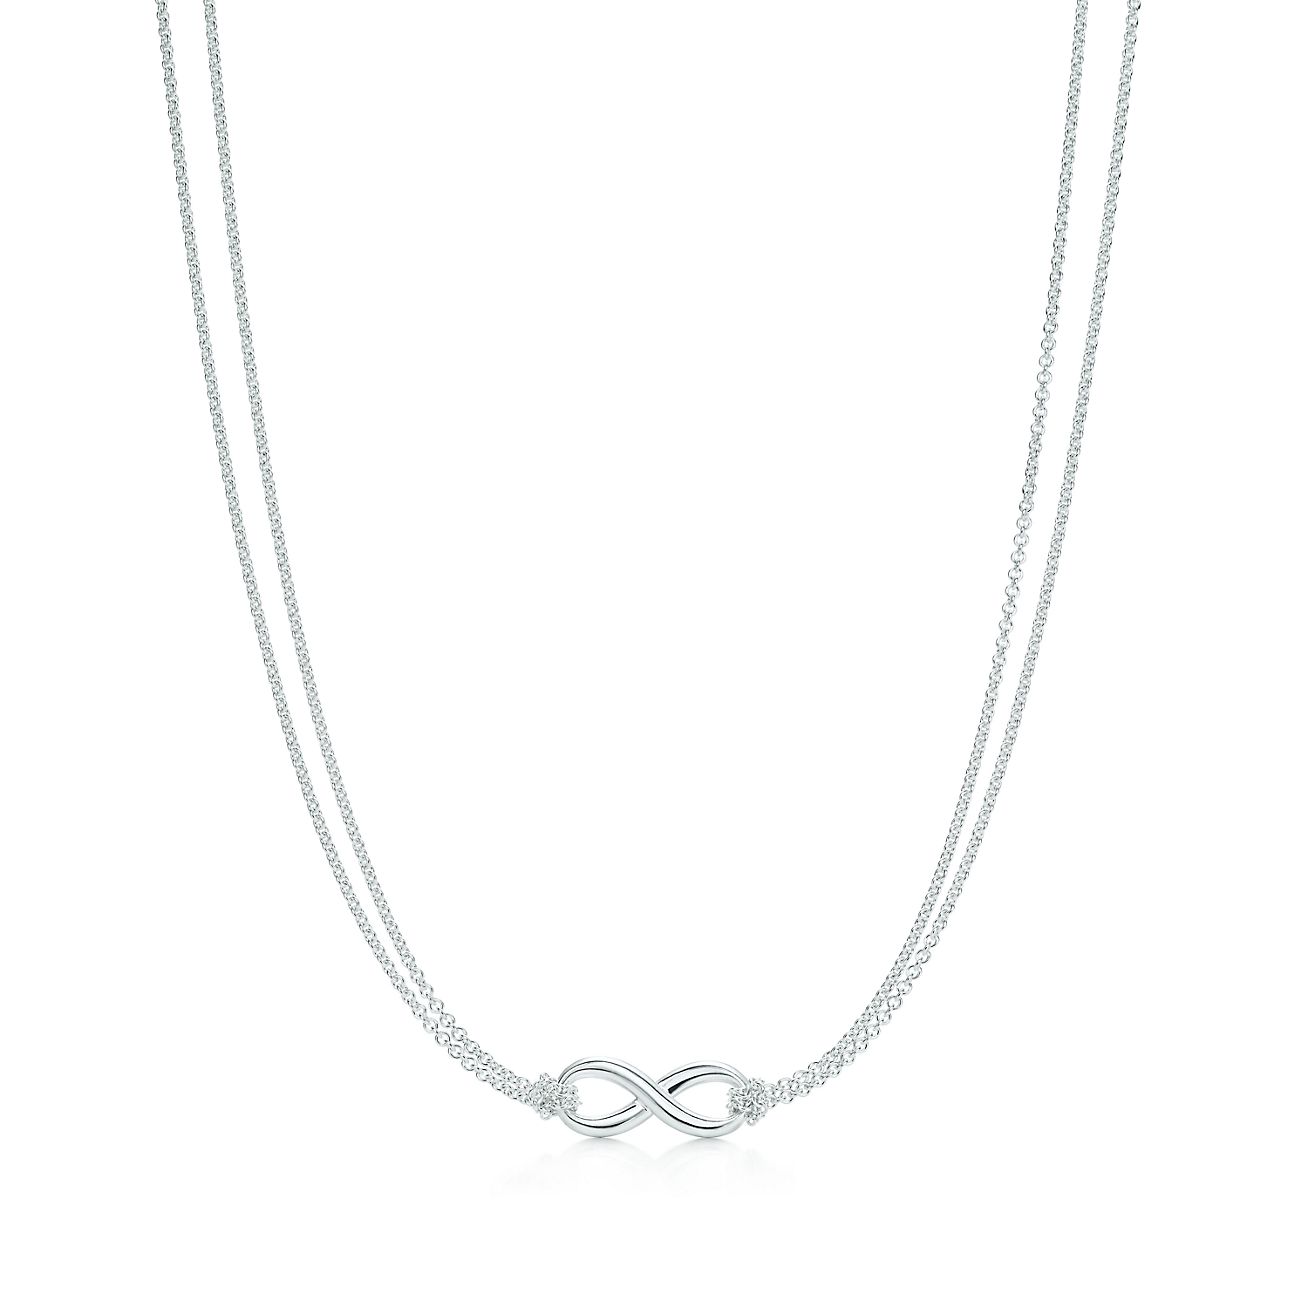 Tiffany Infinity pendant in sterling silver. | Tiffany & Co.